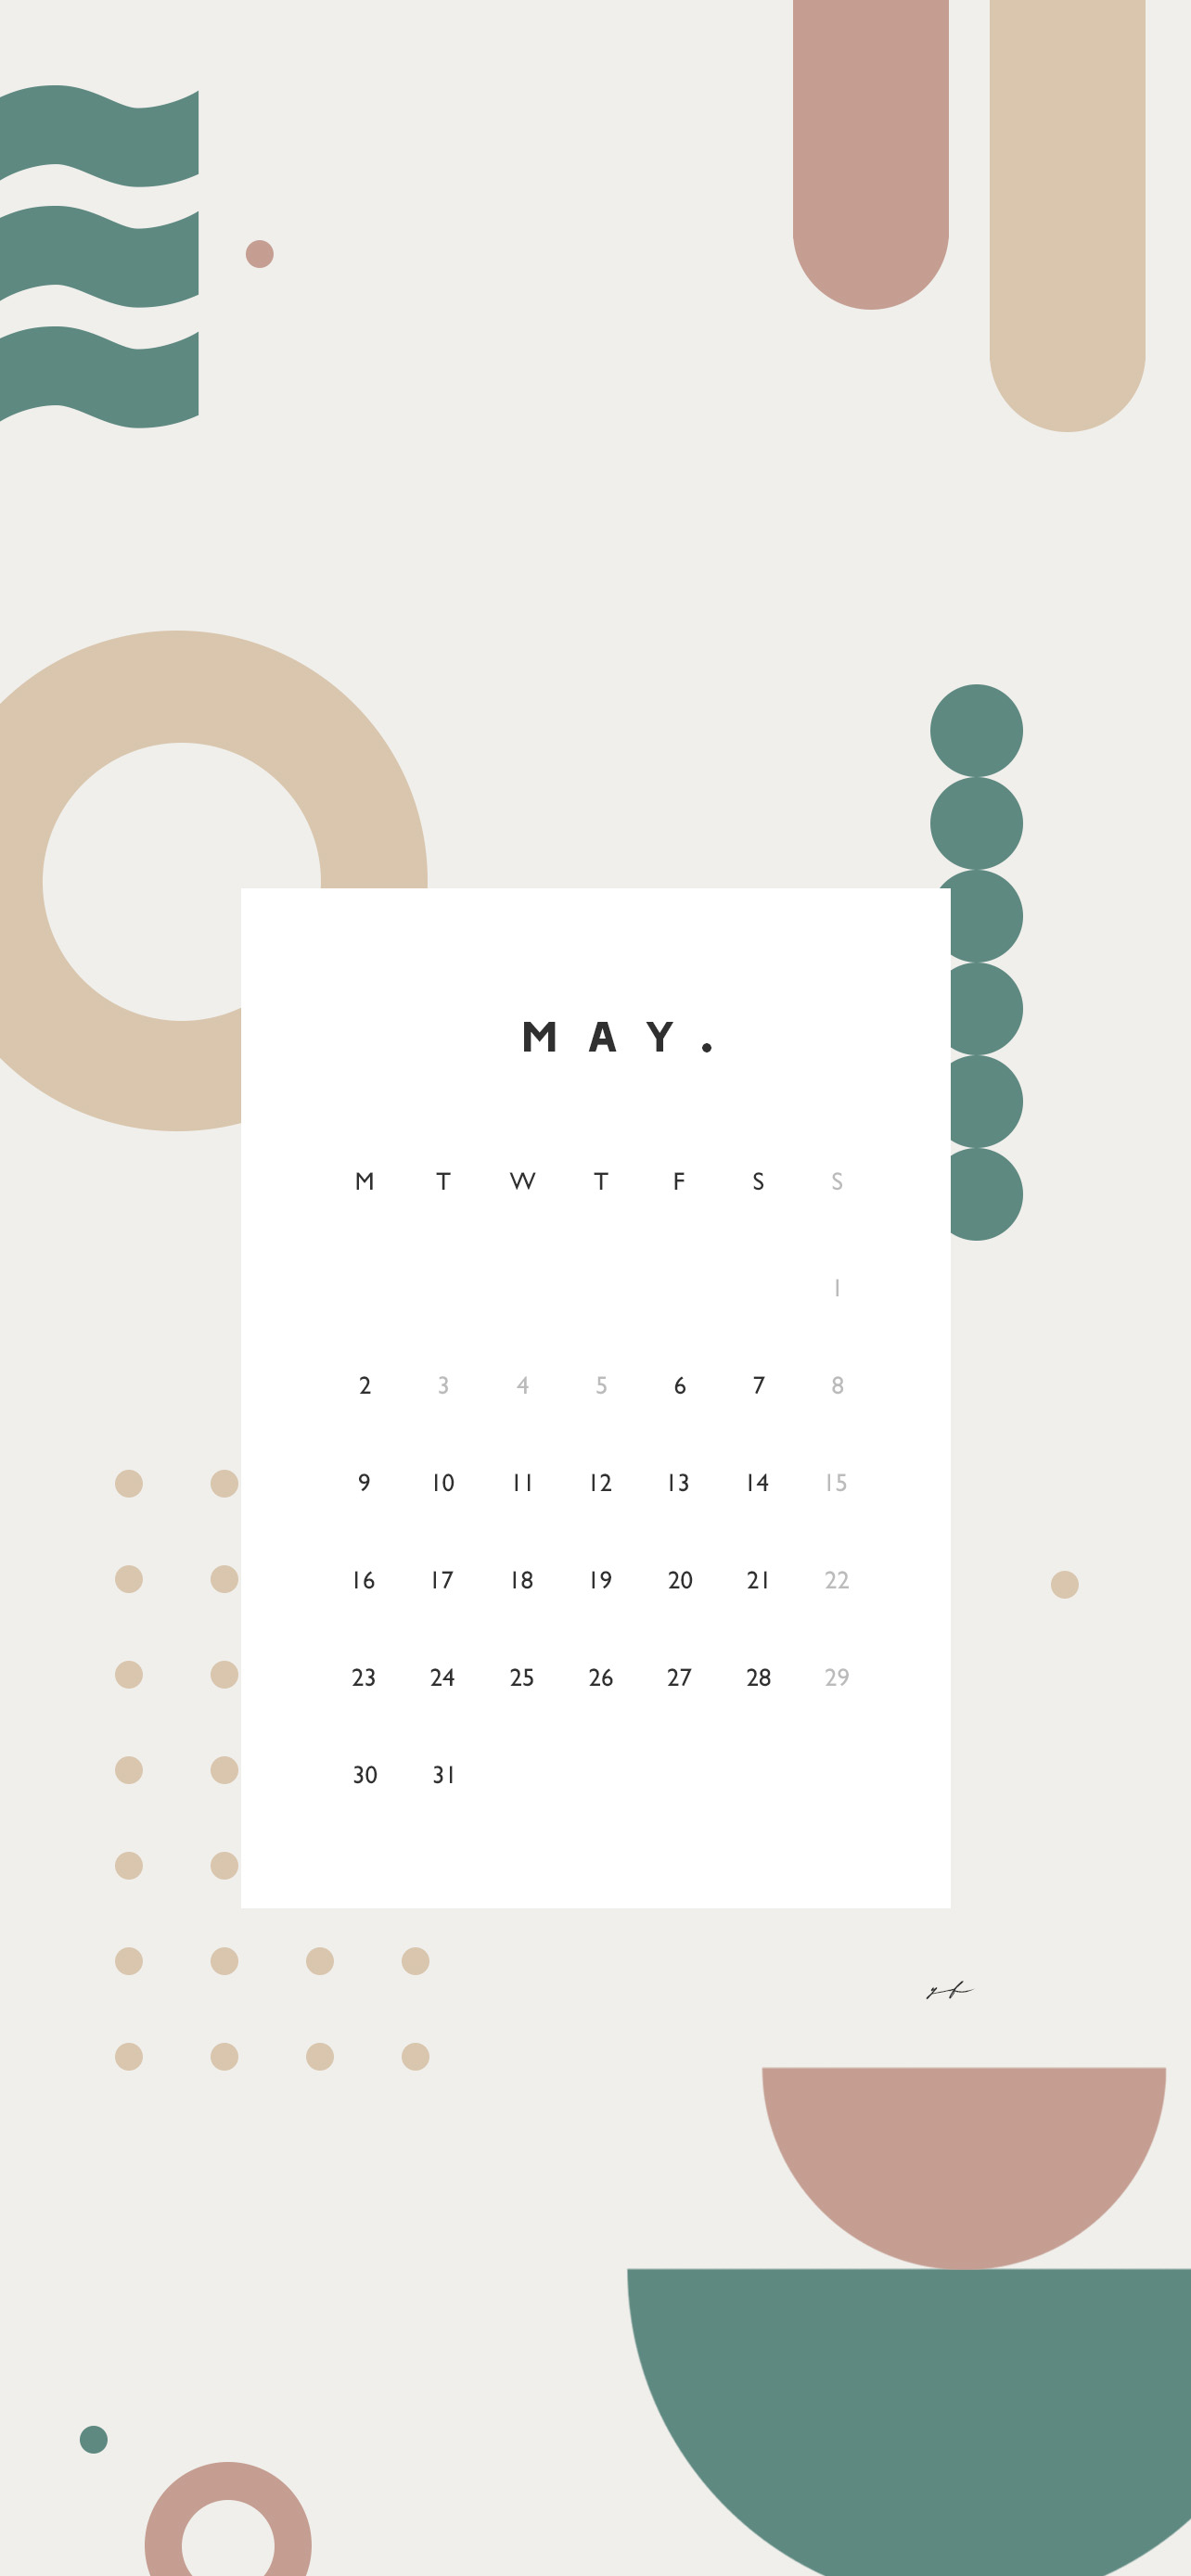 May 22 Calendar Wallpaper For The Iphone Design By Yf